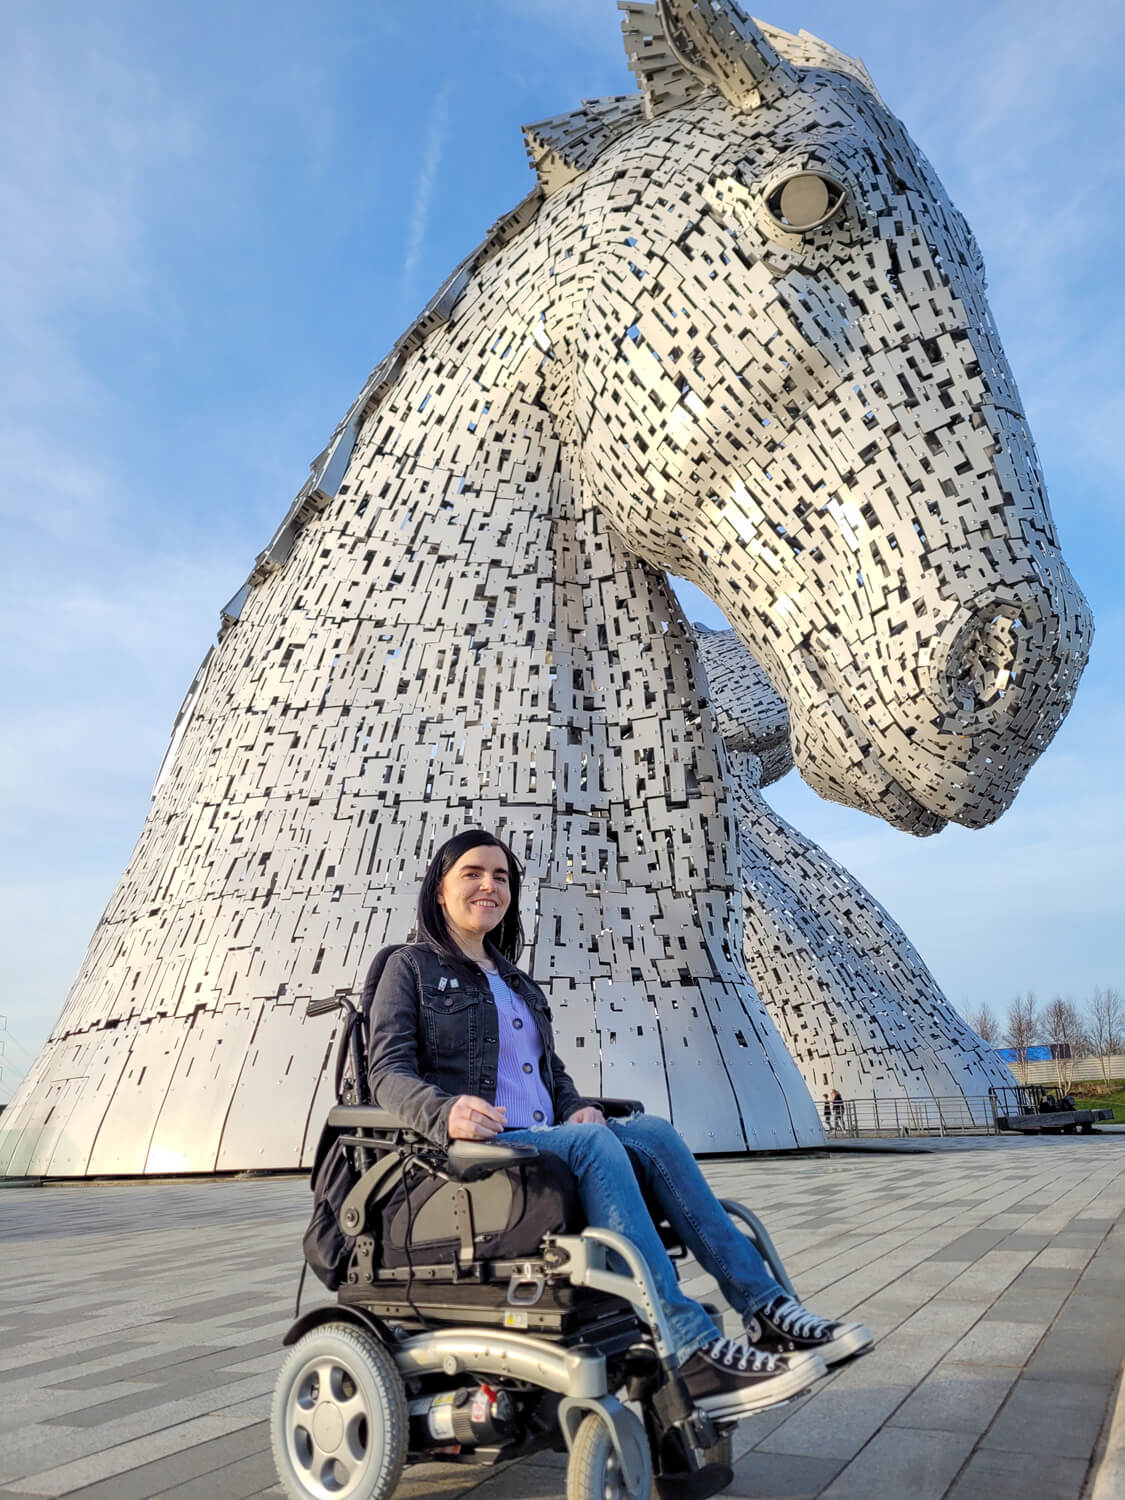 A full shot of Emma sat in her power wheelchair in front of the Kelpies in Falkirk. Emma is smiling at the camera.